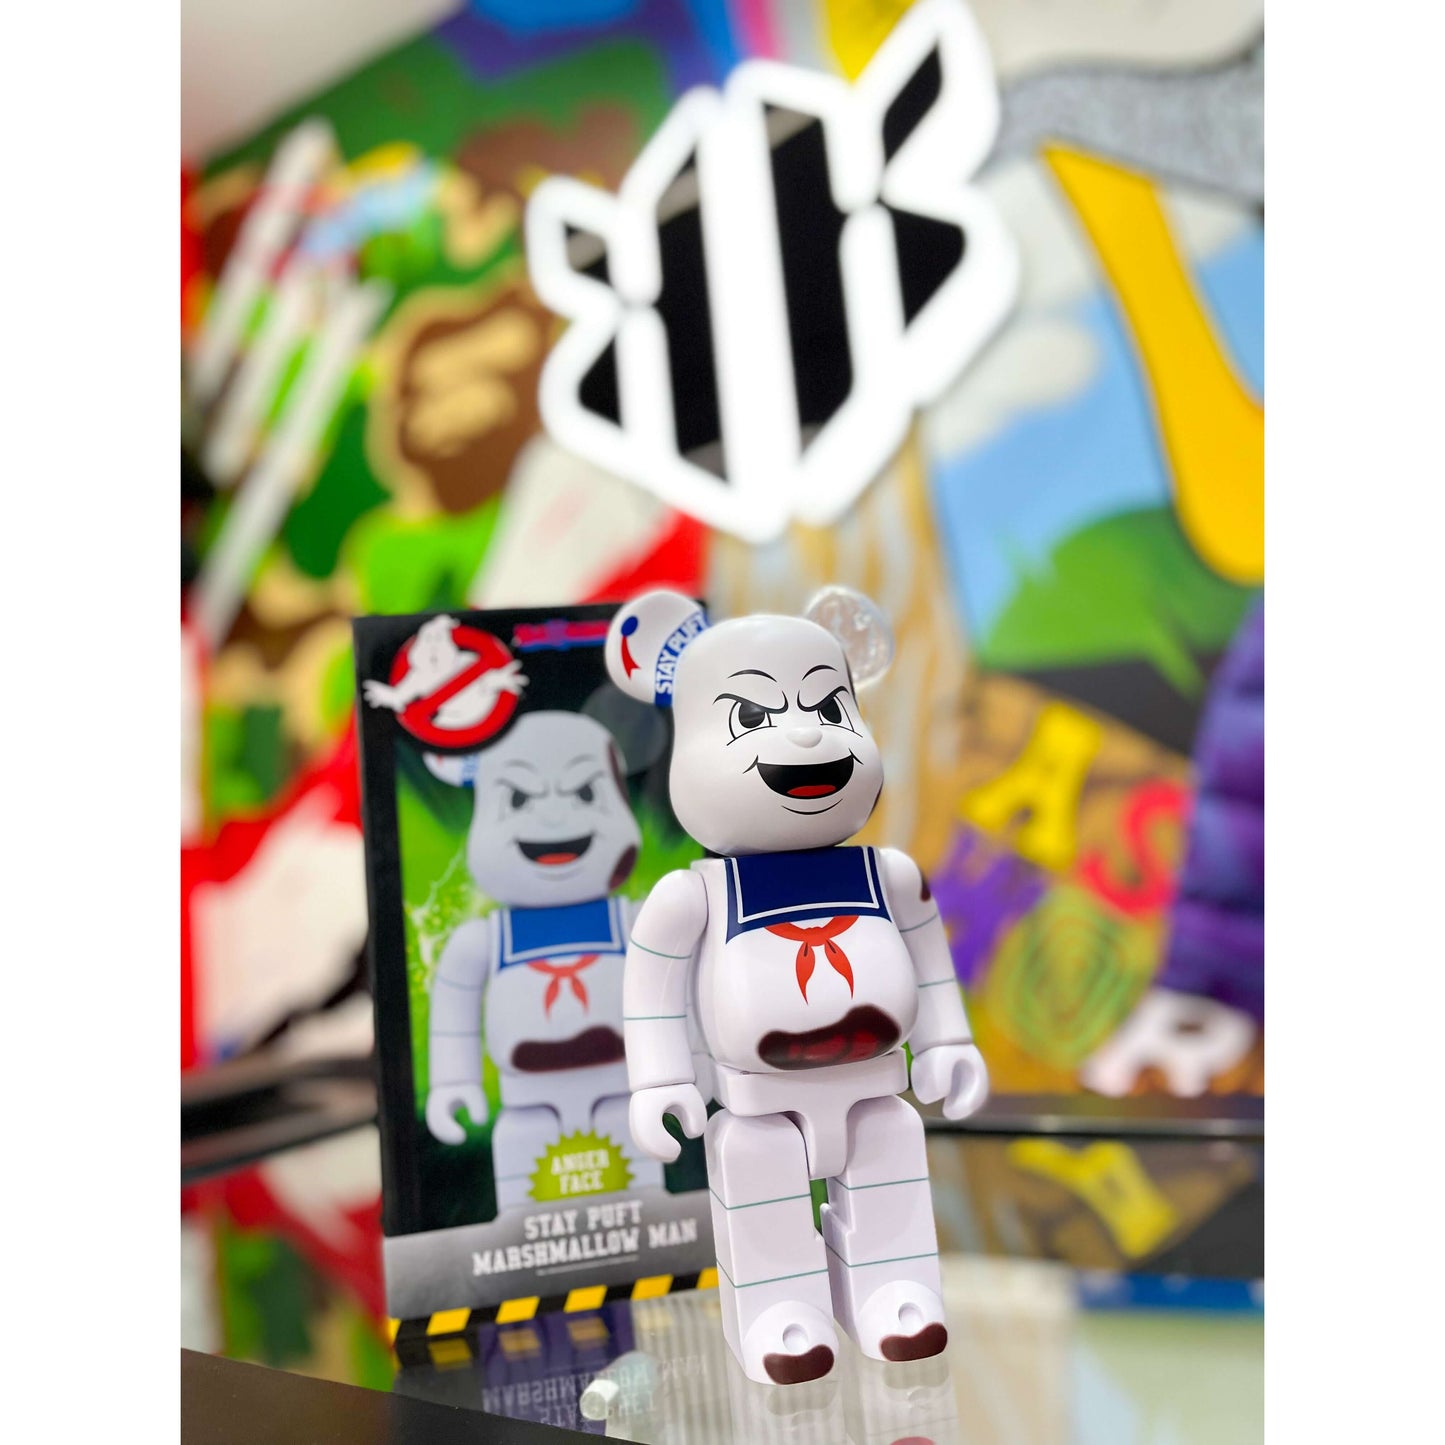 Bearbrick Stay Puft Marshmallow Man 400% White by Bearbrick from £162.99